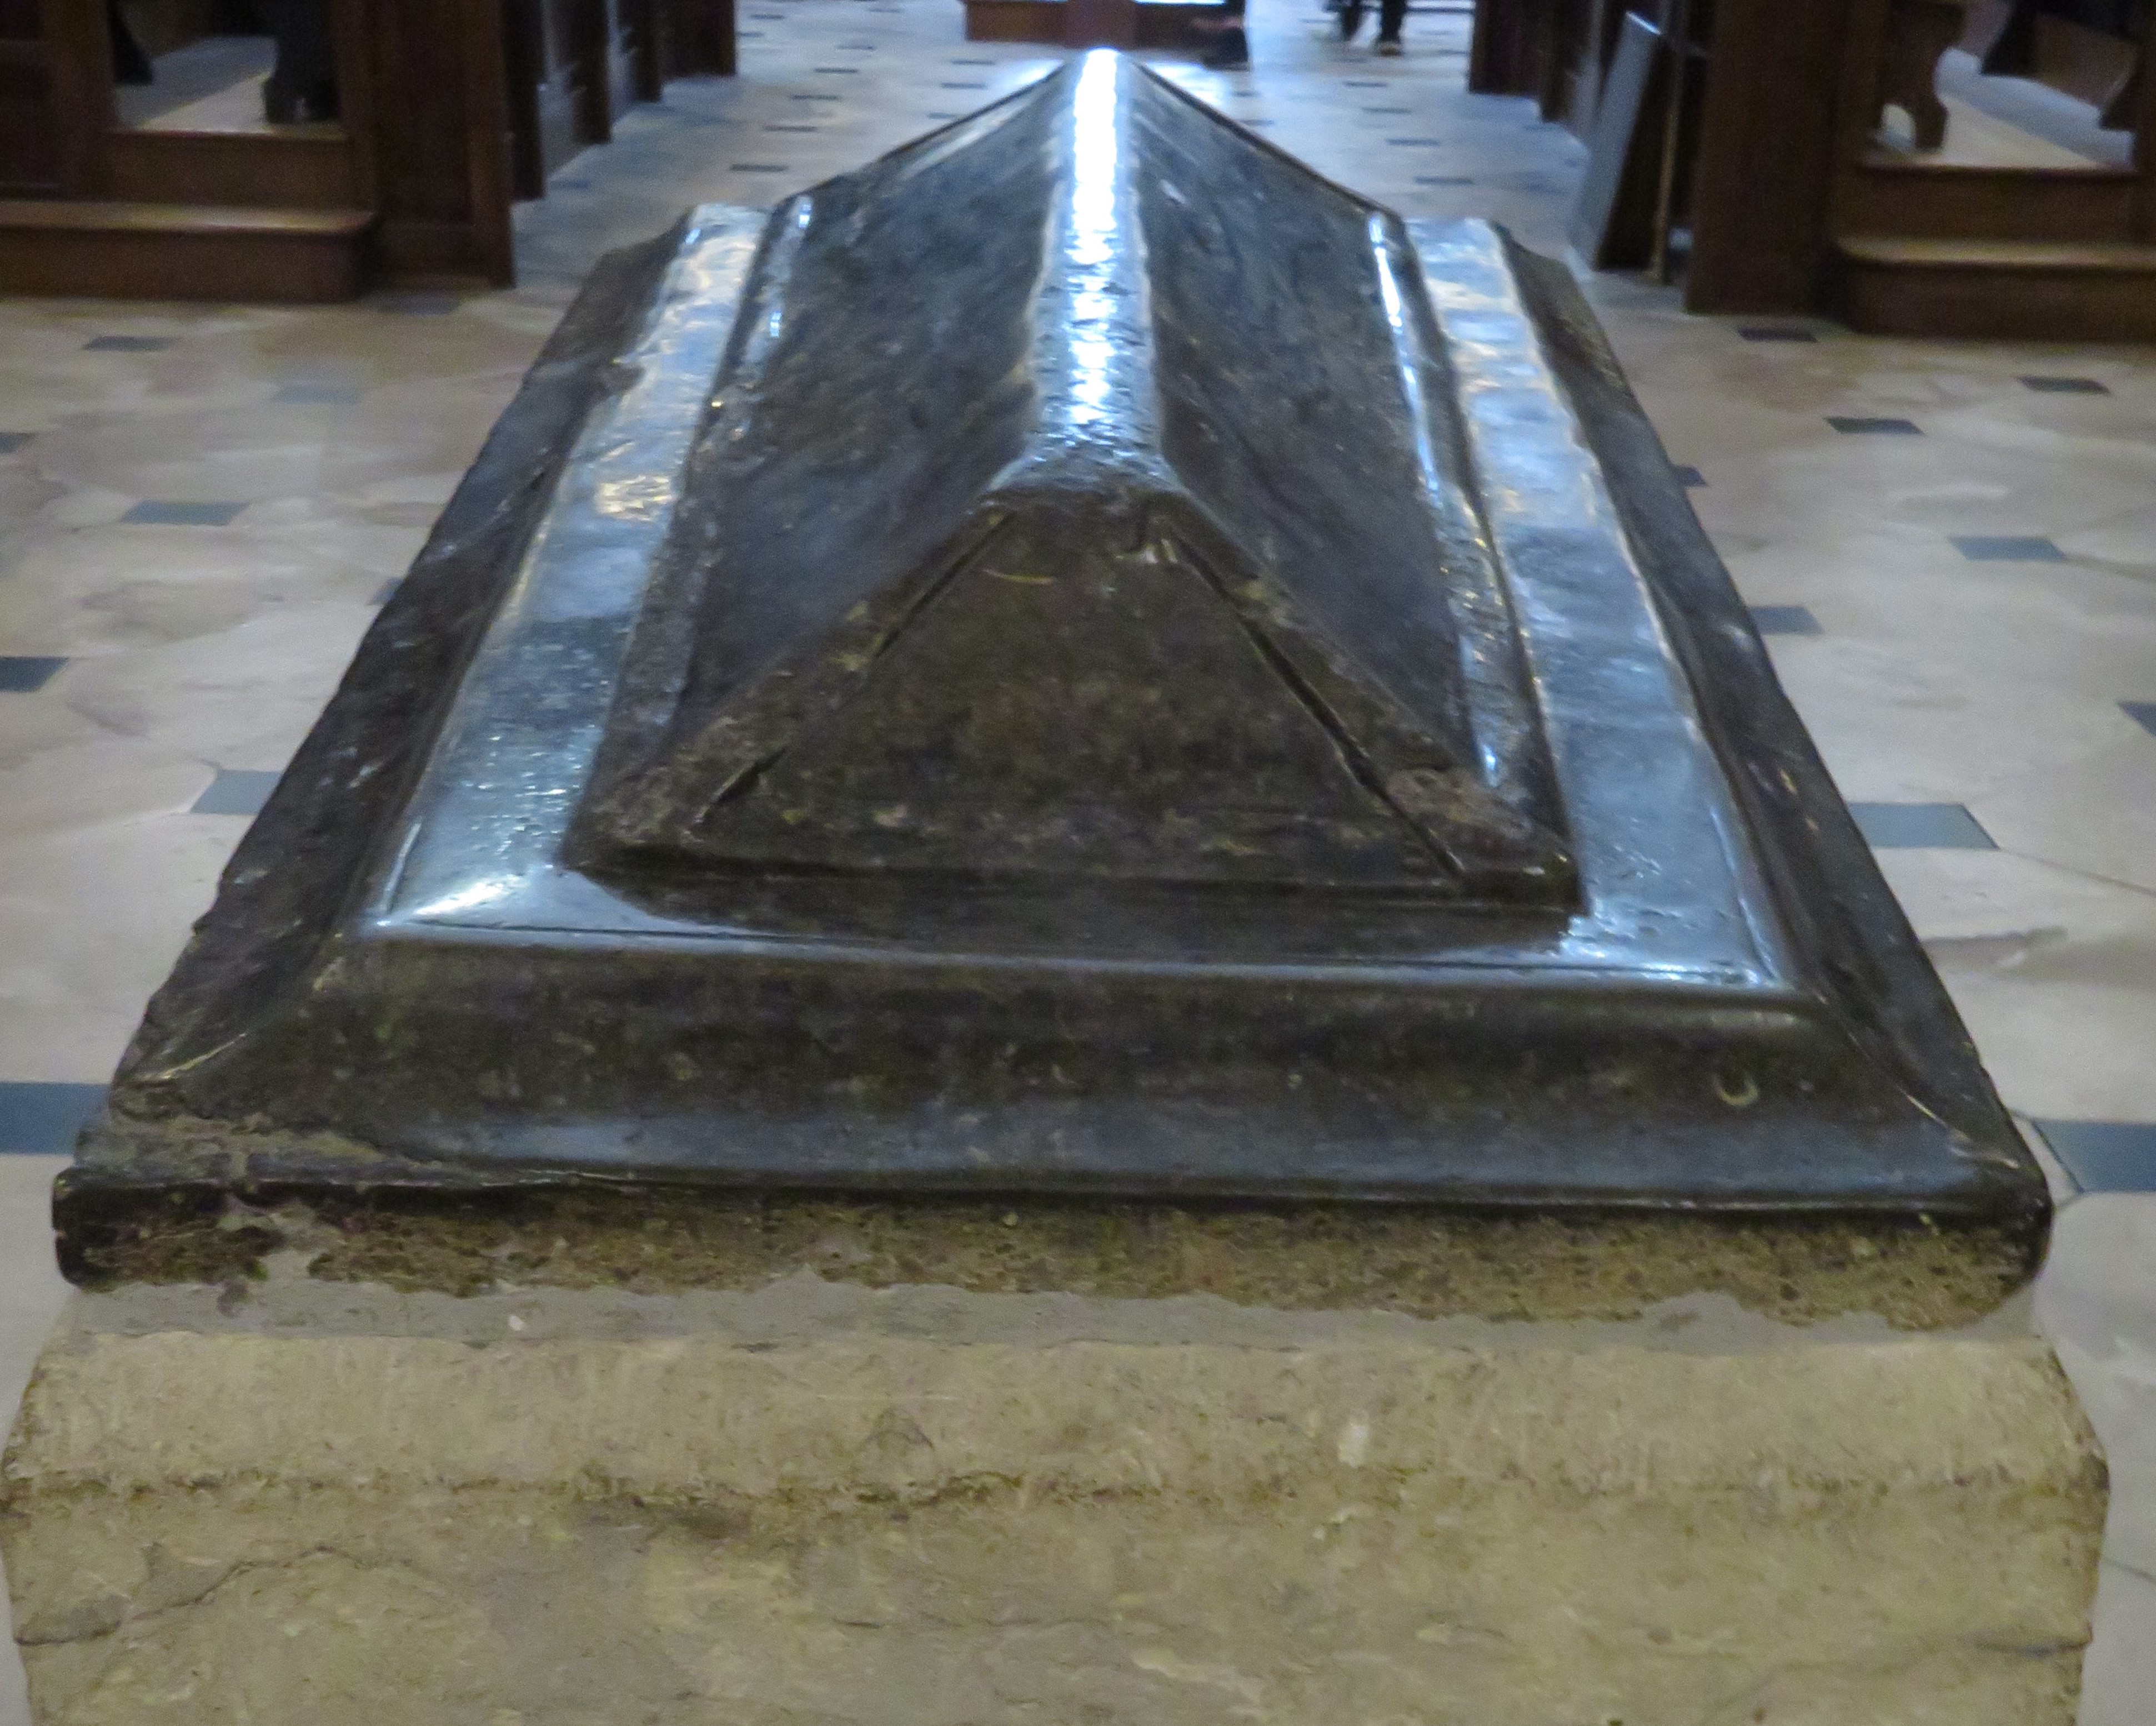 Tomb of Henry of Blois